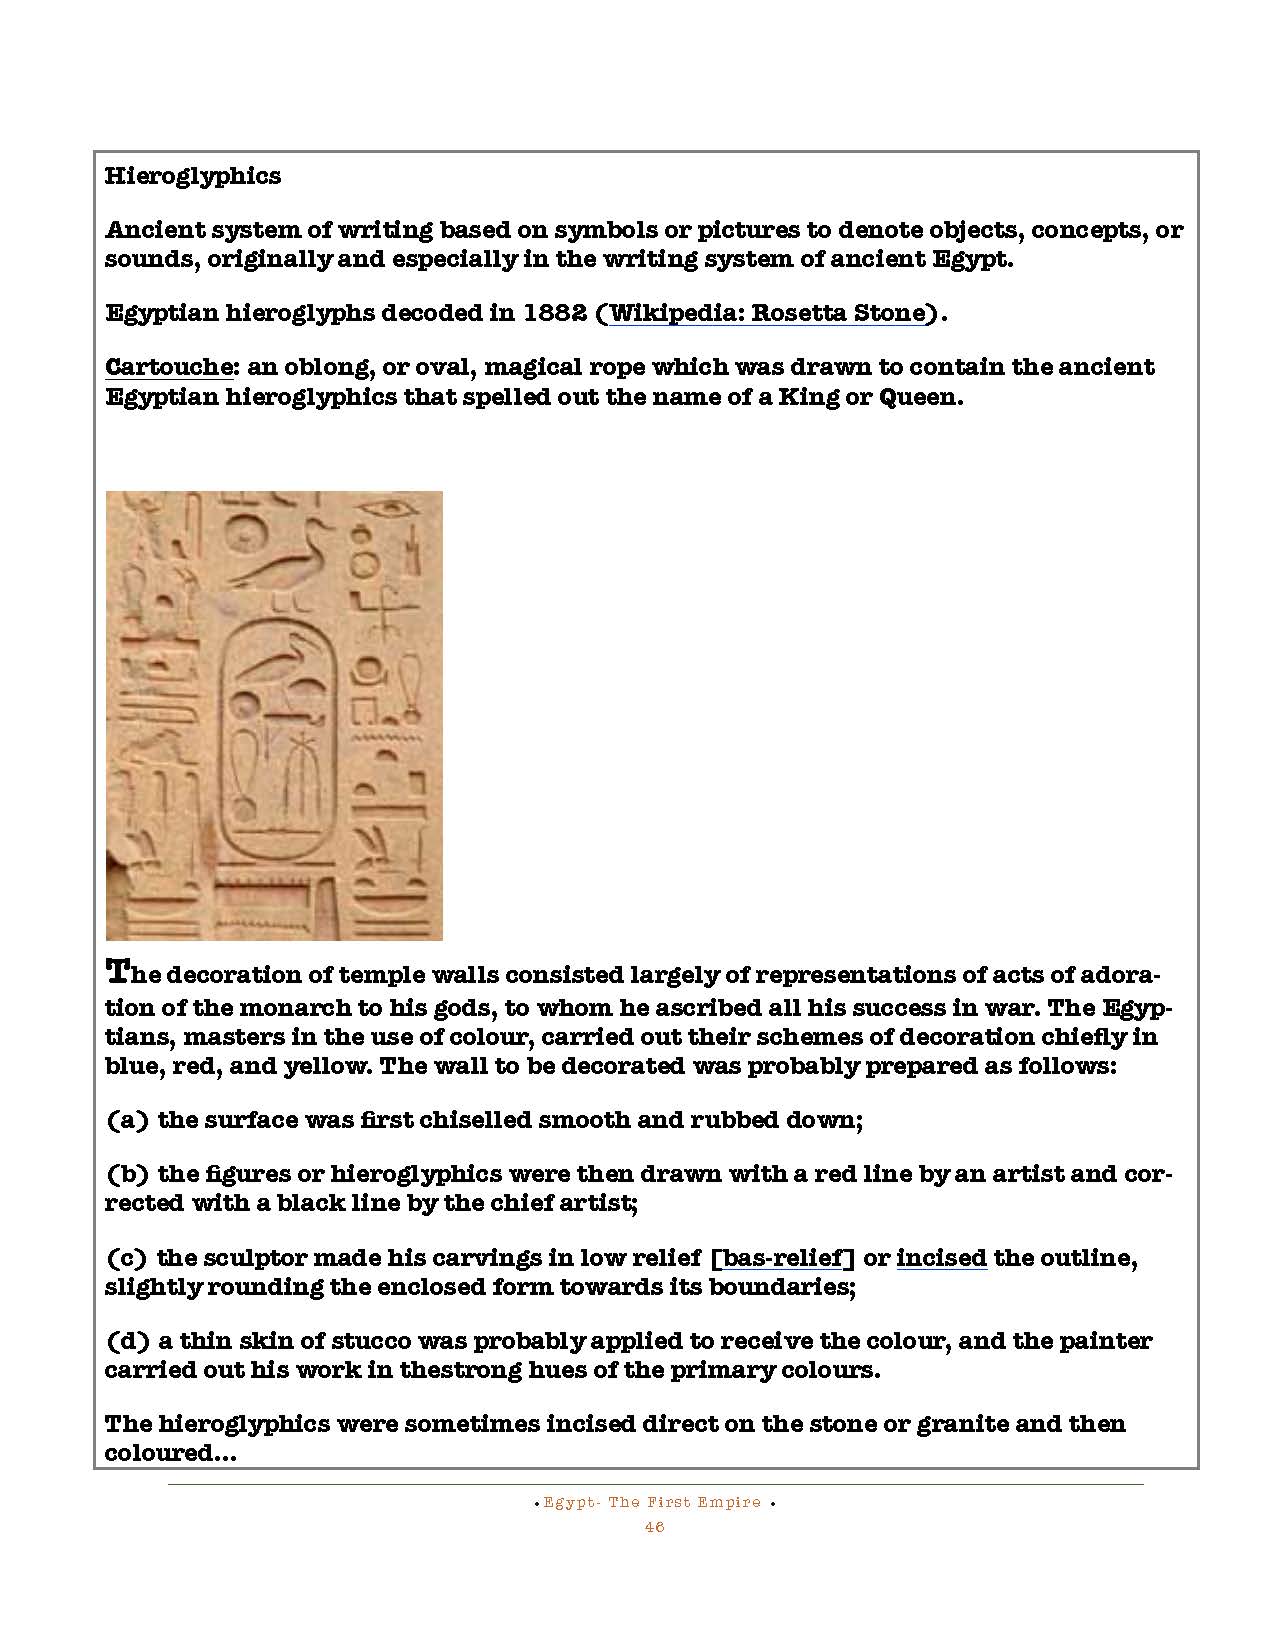 HOCE- Egypt  (First Empire) Notes_Page_046.jpg